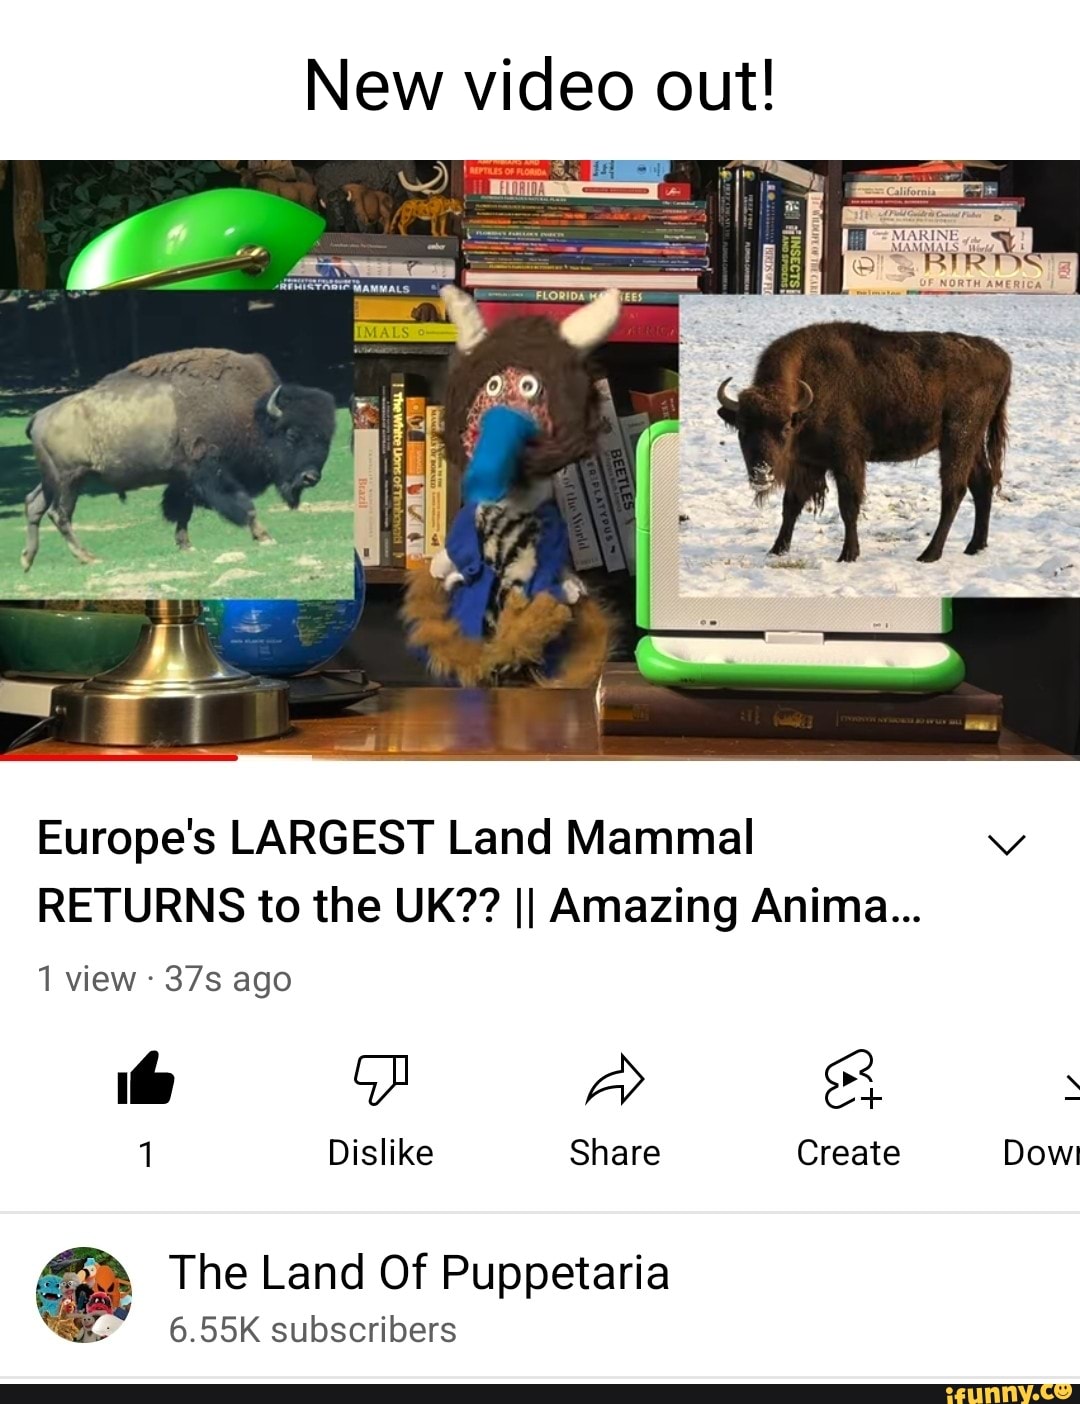 New video out! Europe's LARGEST Land Mammal RETURNS to the UK?? II Amazing  Anime... 1 view ago aA 1 Dislike Share Create Dow! The Land Of Puppetaria   subscribers 